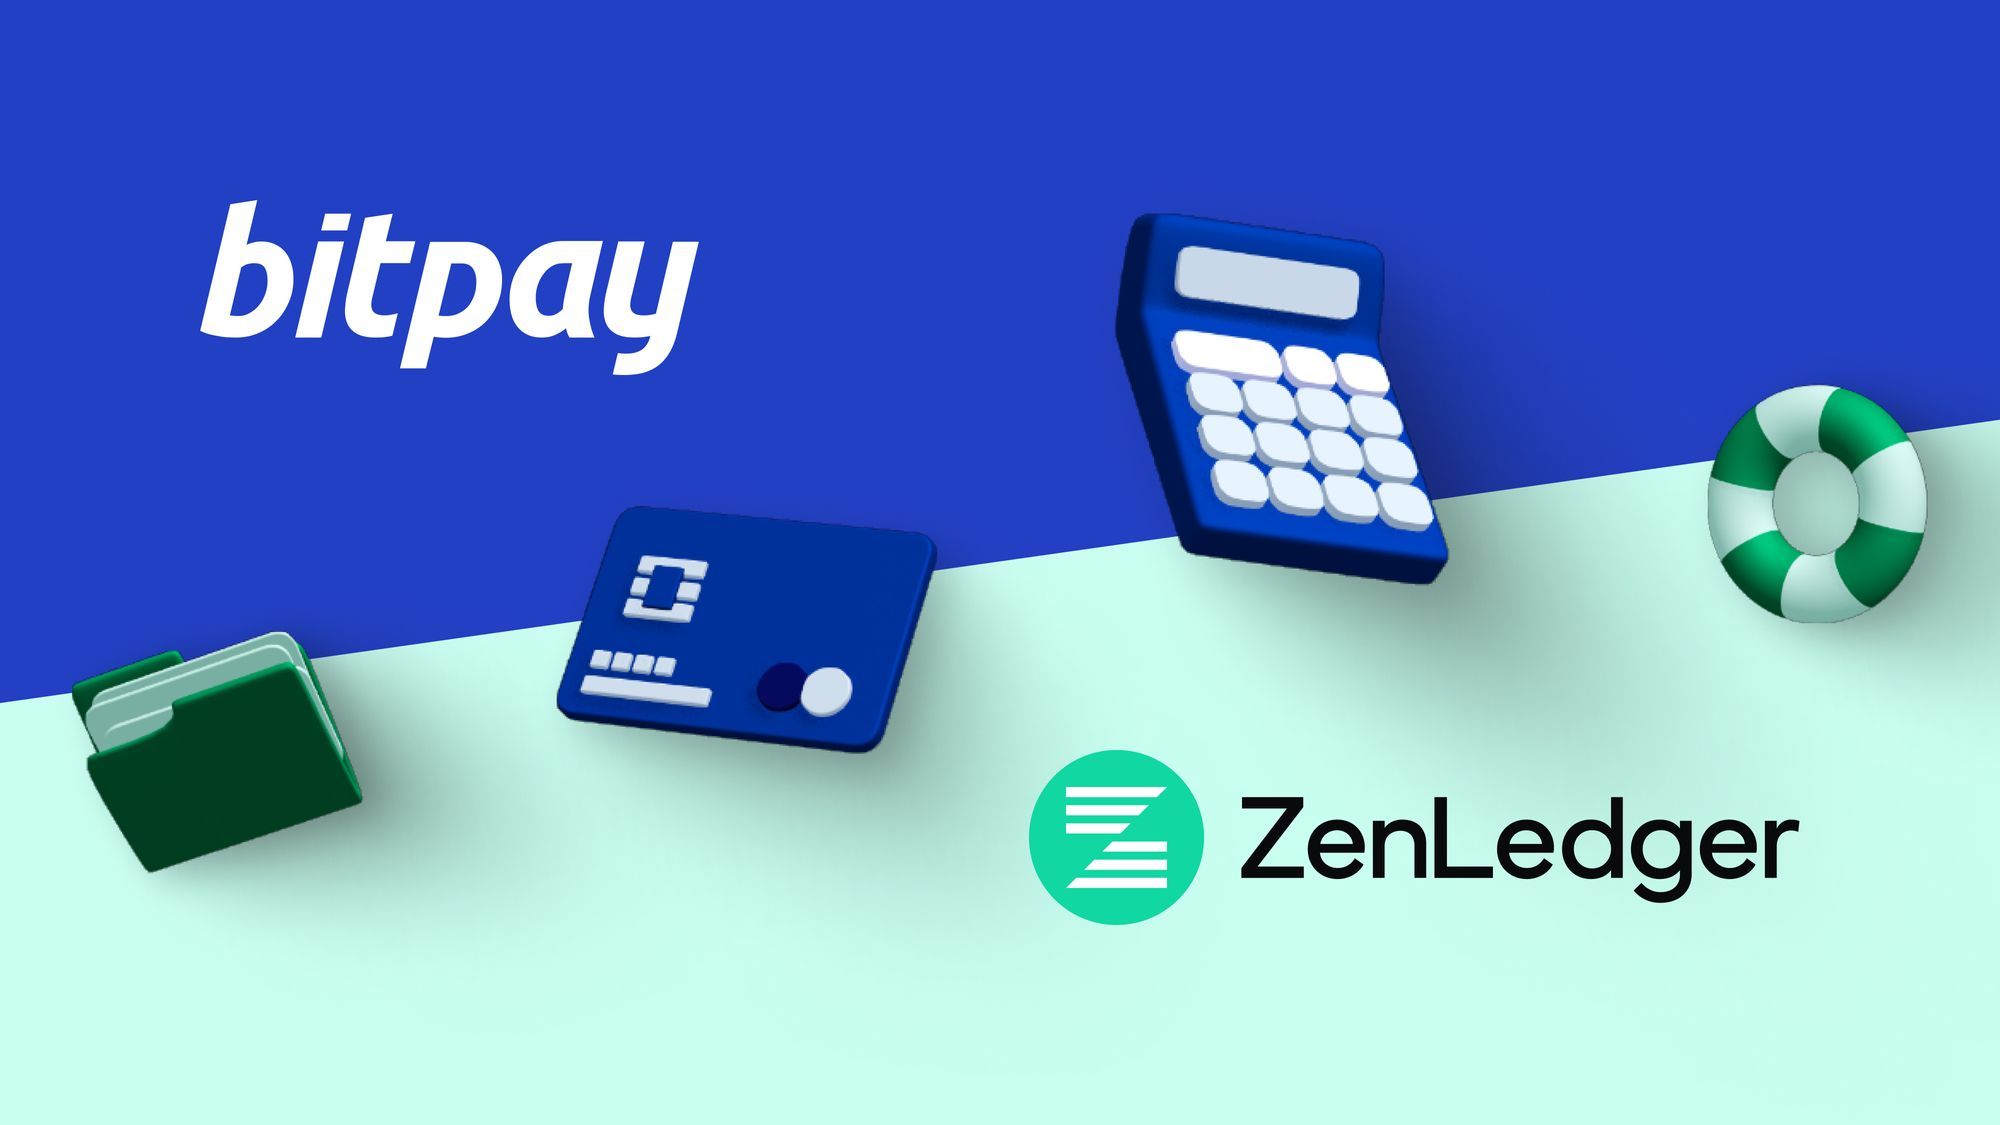 BitPay Partners with ZenLedger for Easy Crypto Tax Management and Filing - Get 20% Off Subscription